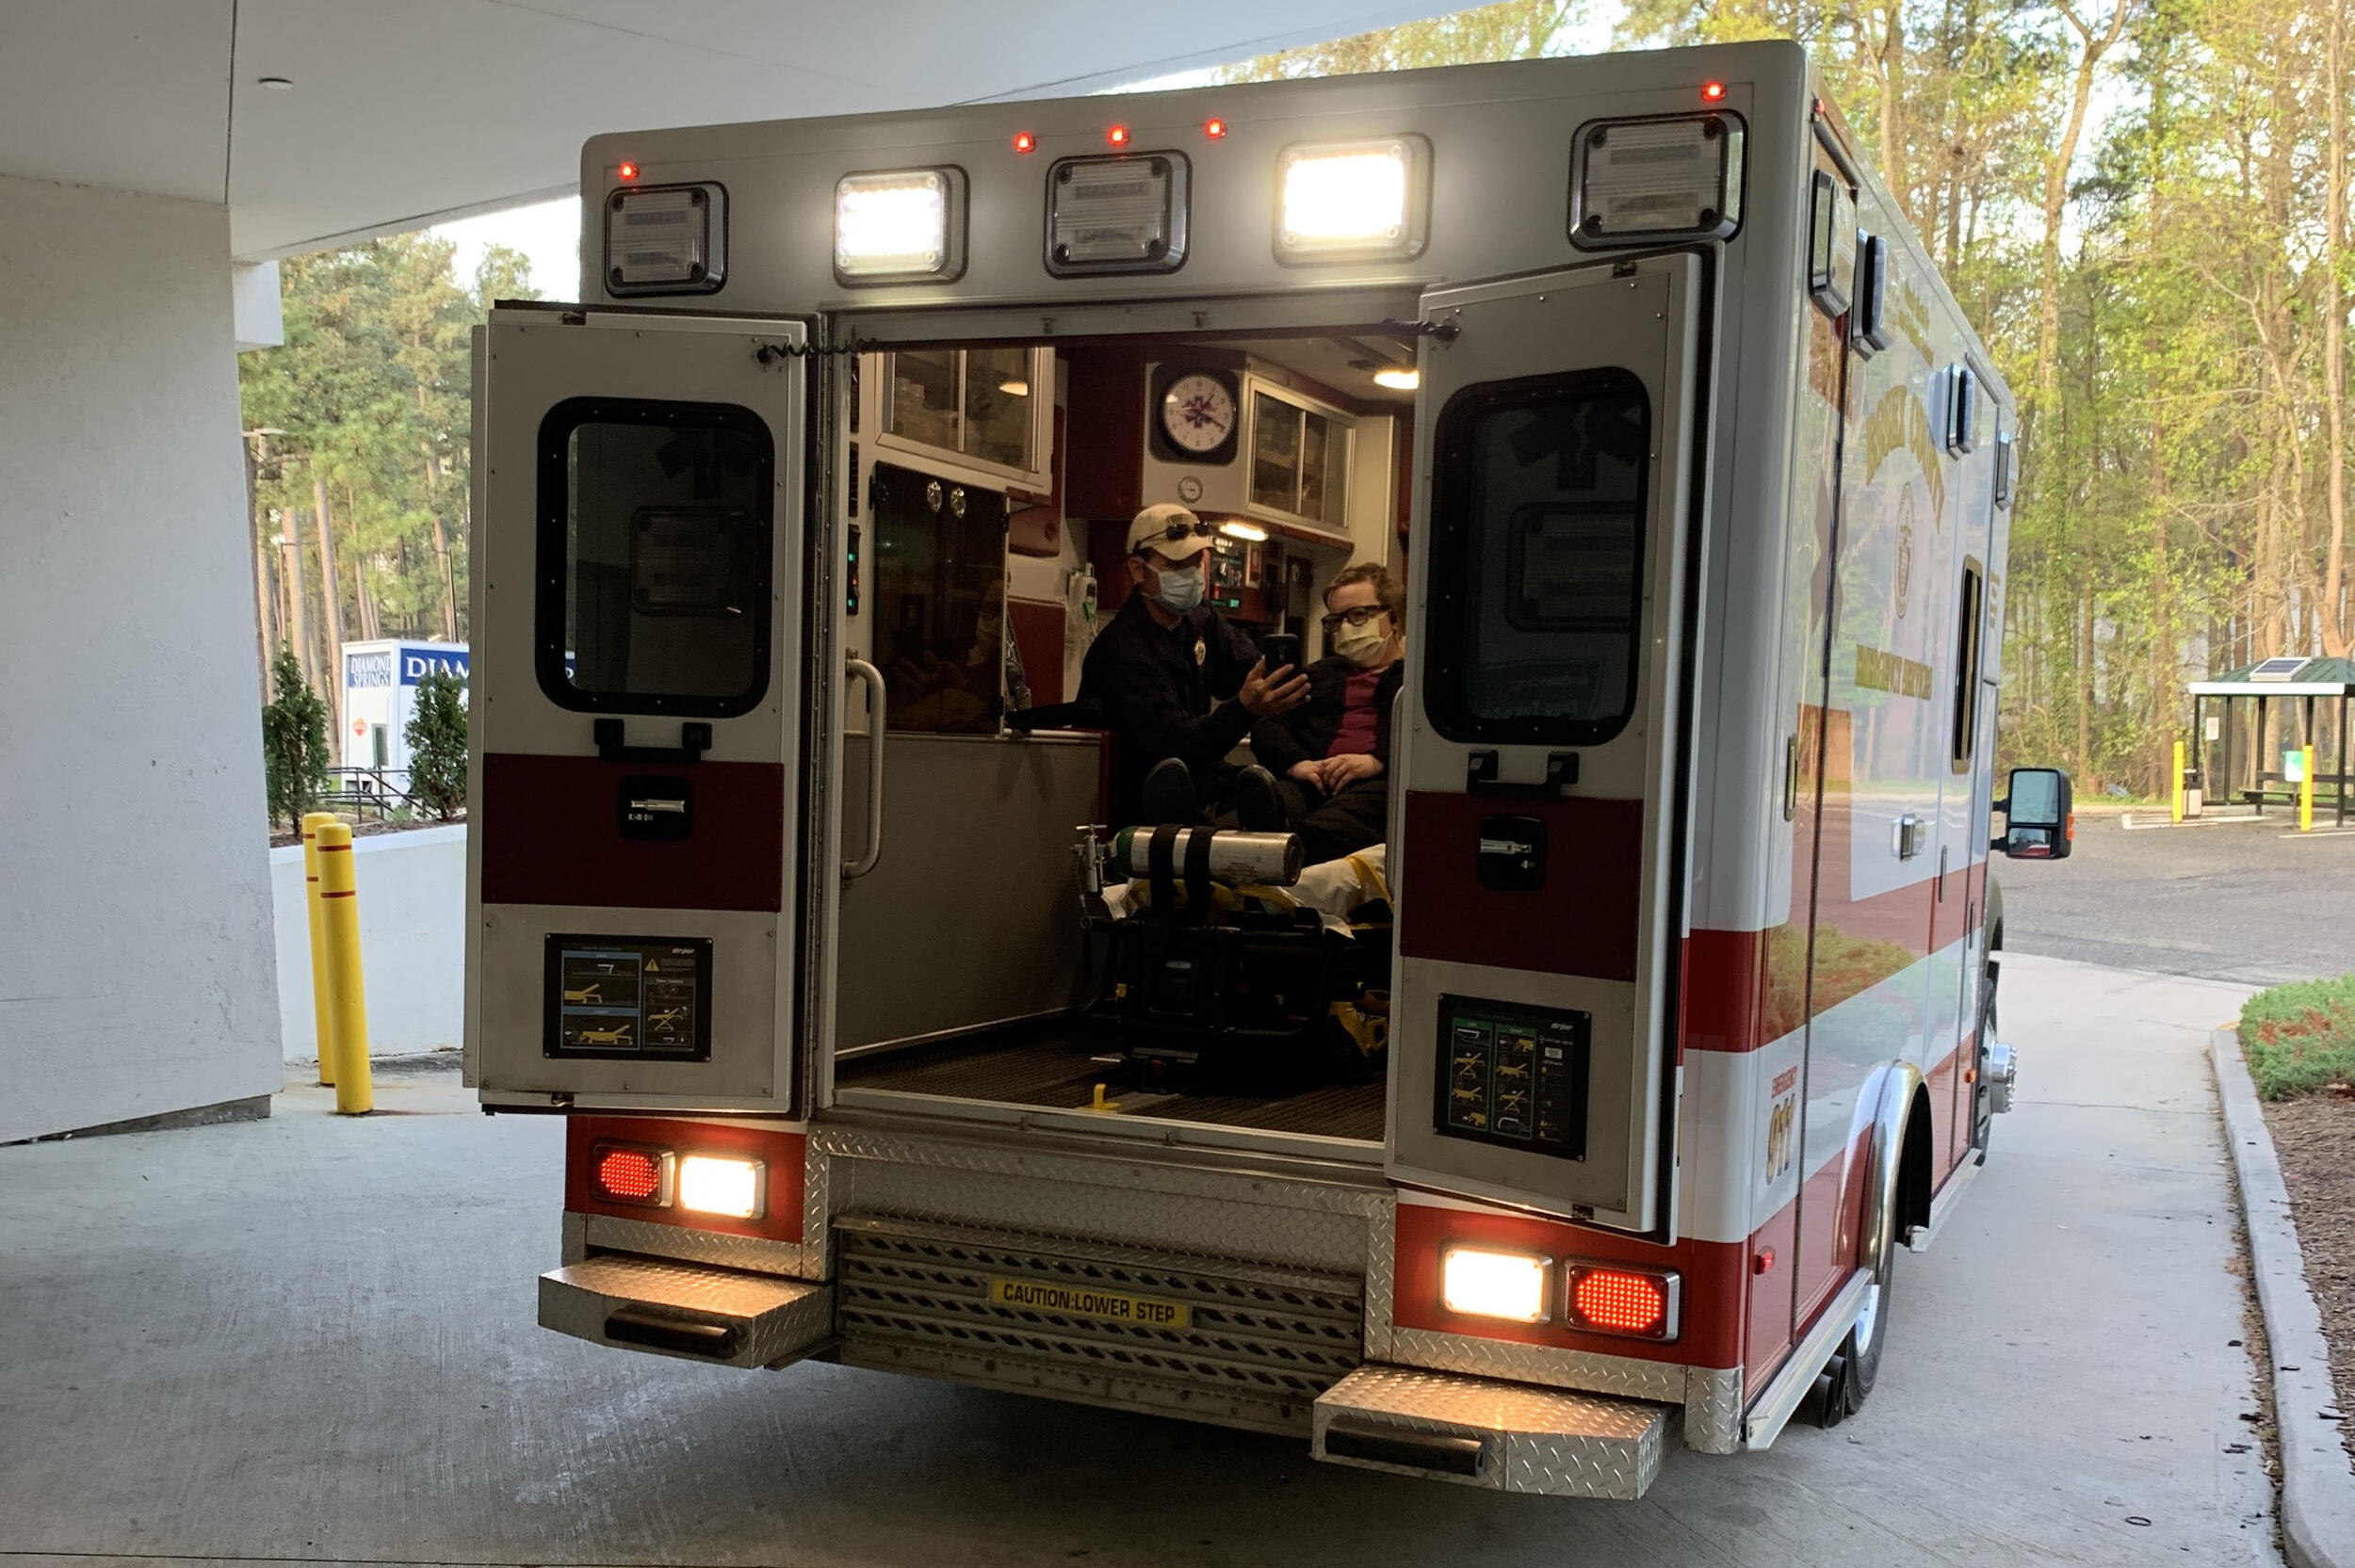 An ambulance with two people inside.